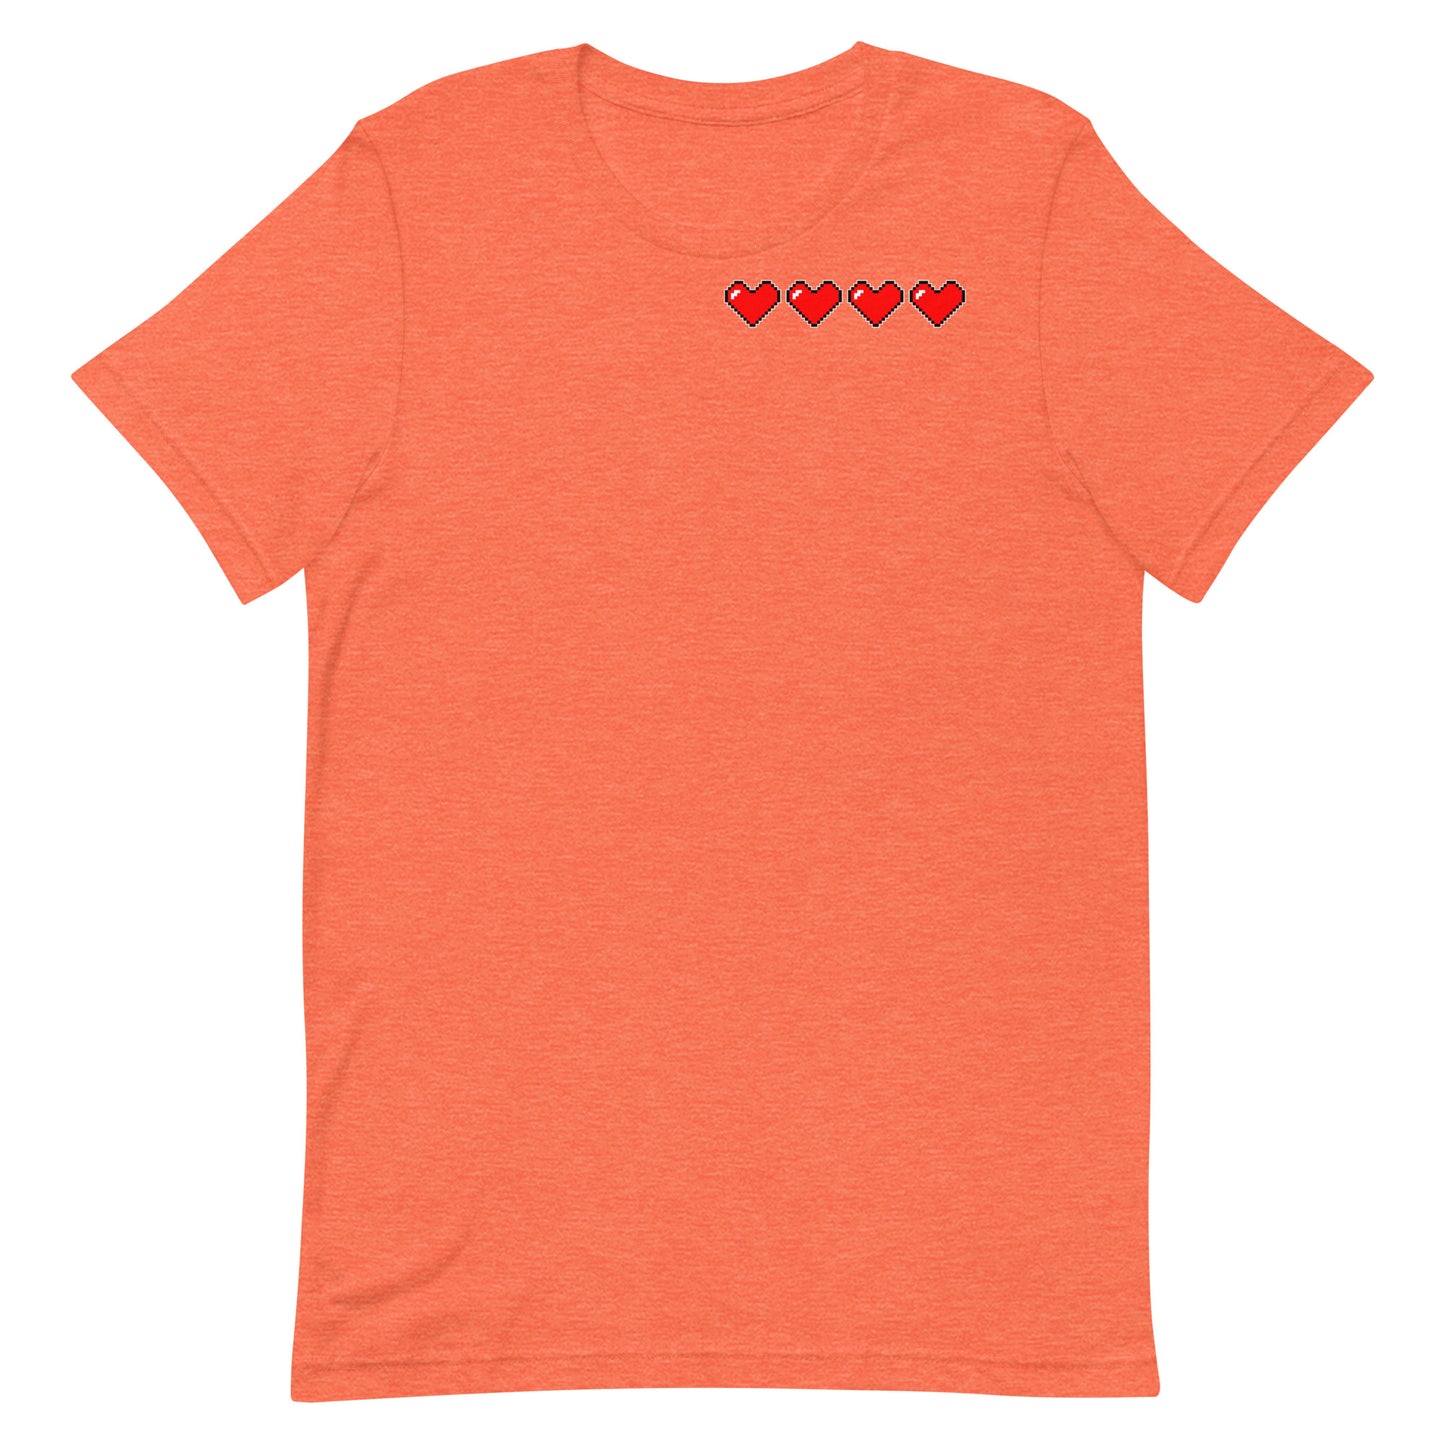 Four hearts - T-Shirt - Heathered, color blends